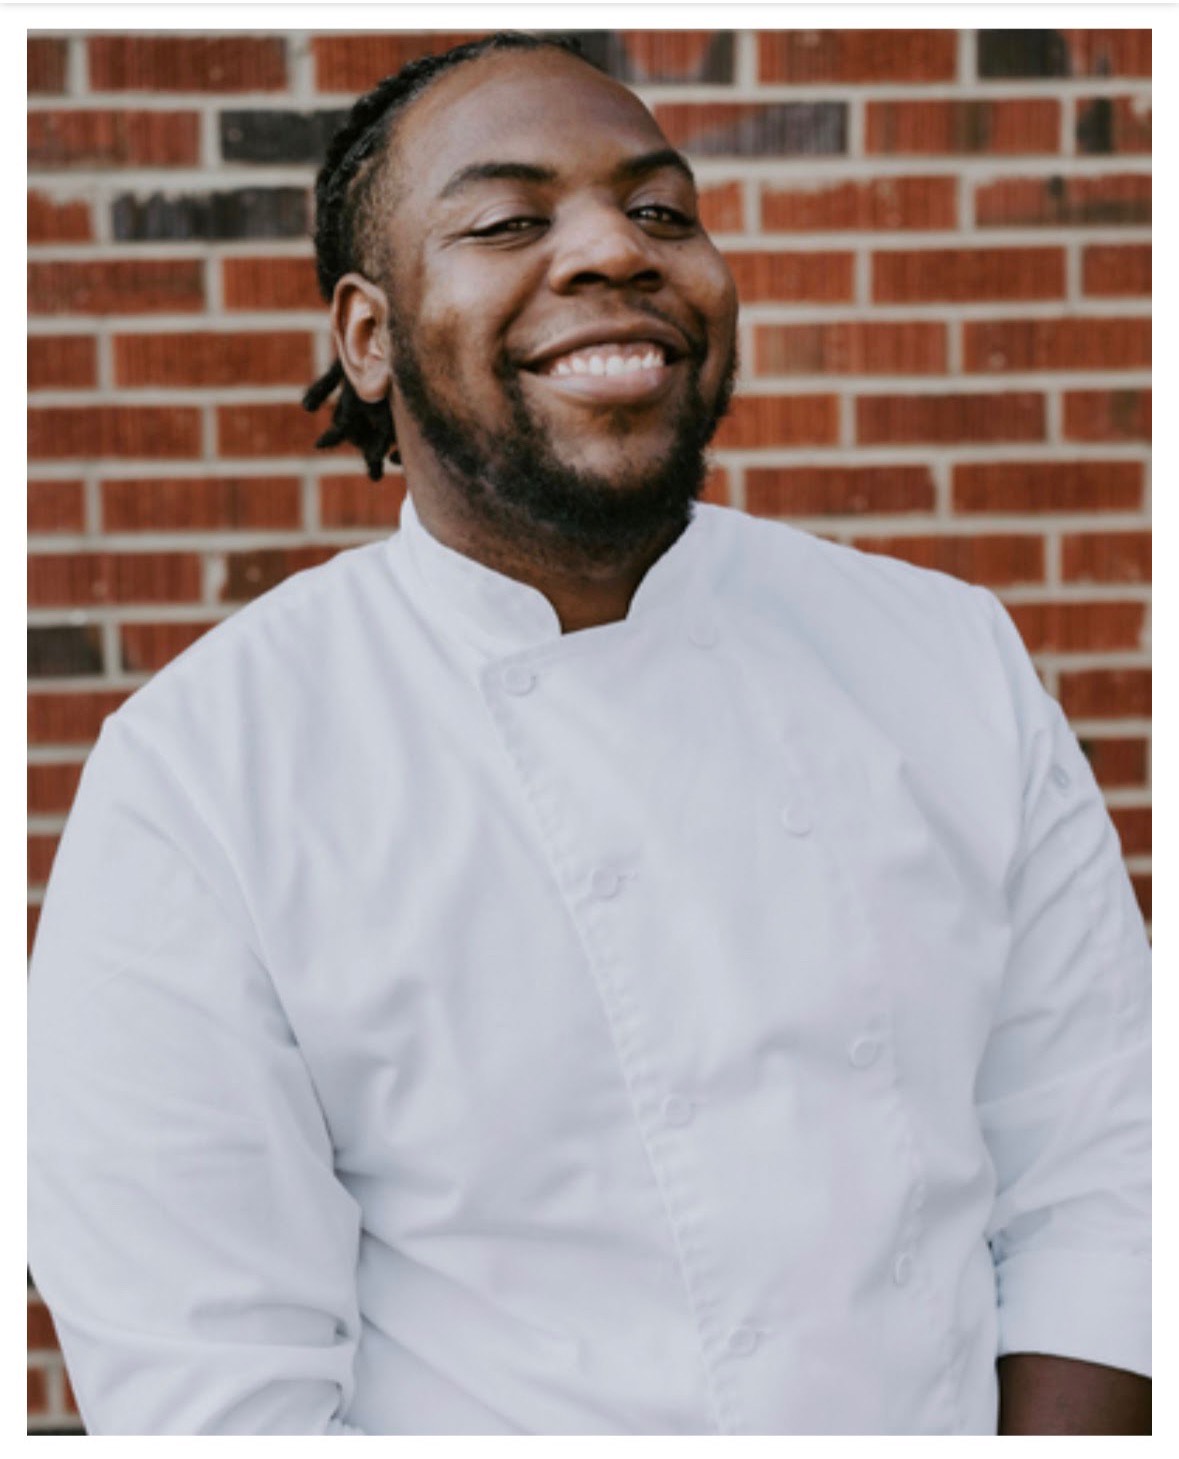 Chef Mike Sibert of White Wine & Butter, part of Greenville's culinary scene